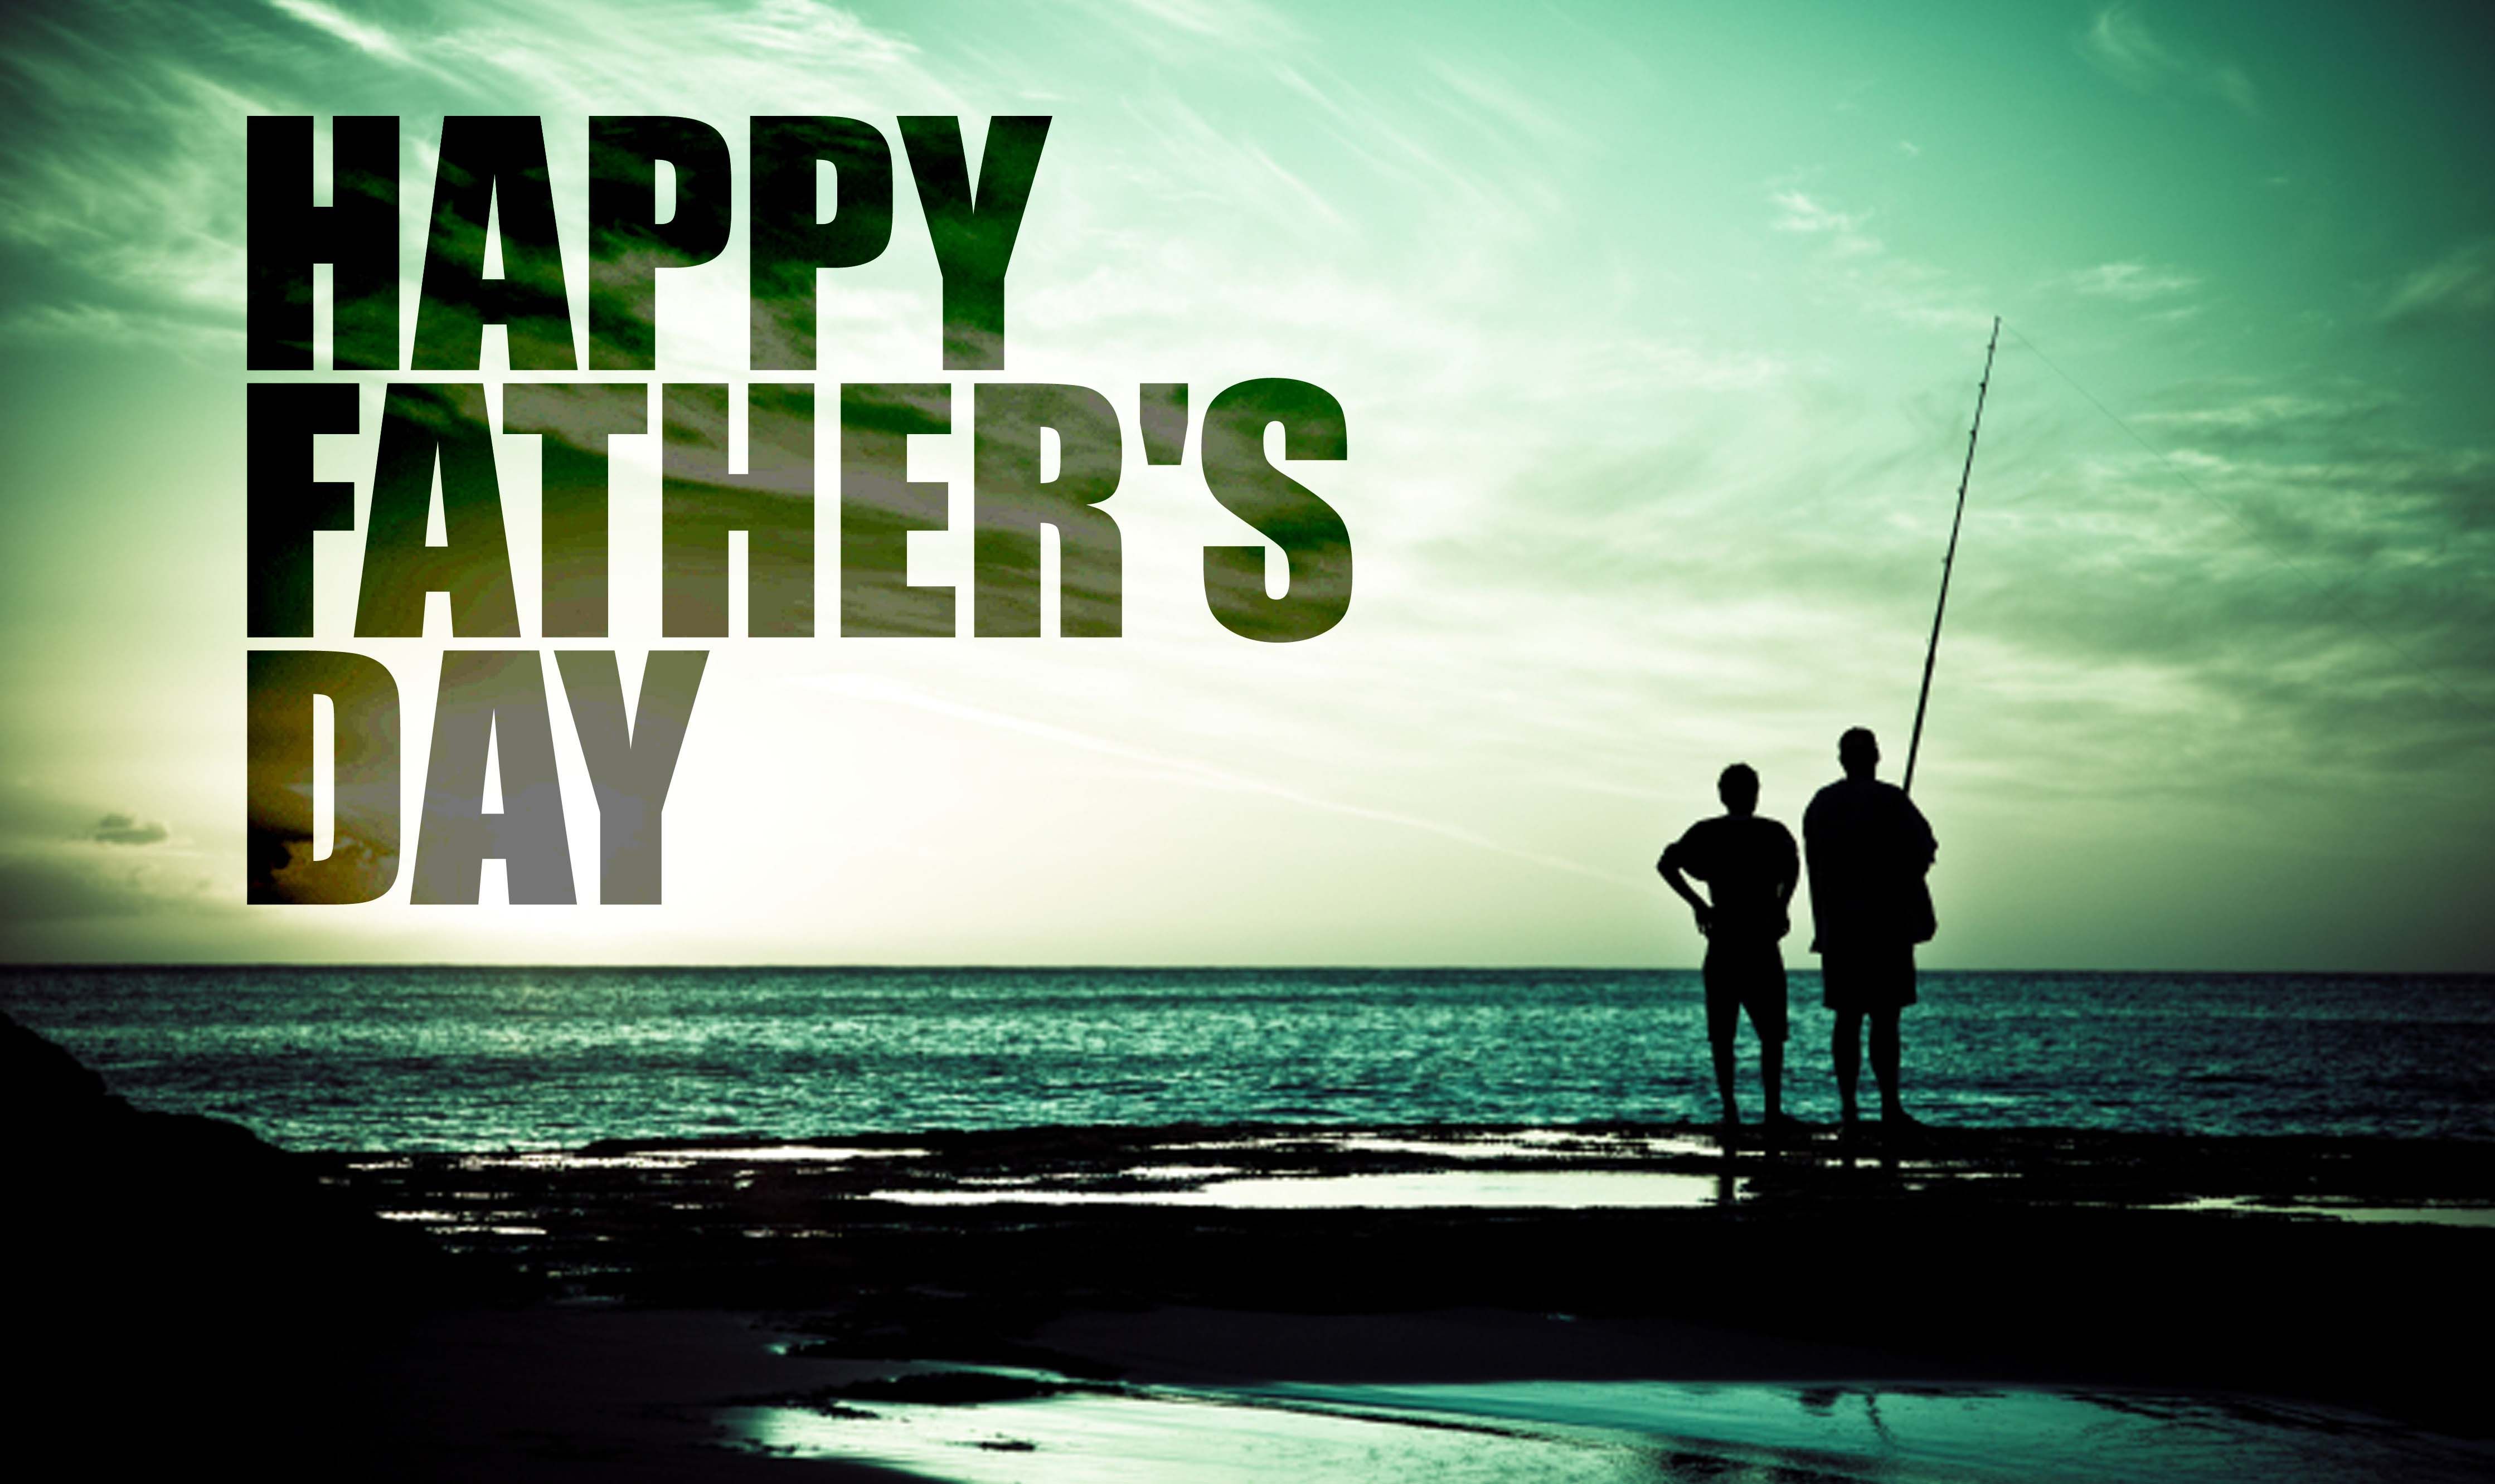 Happy Father's Day 2016 Wallpaper Ultra HD 4K. Happy fathers day wallpaper, Fathers day wallpaper, Fathers day poems